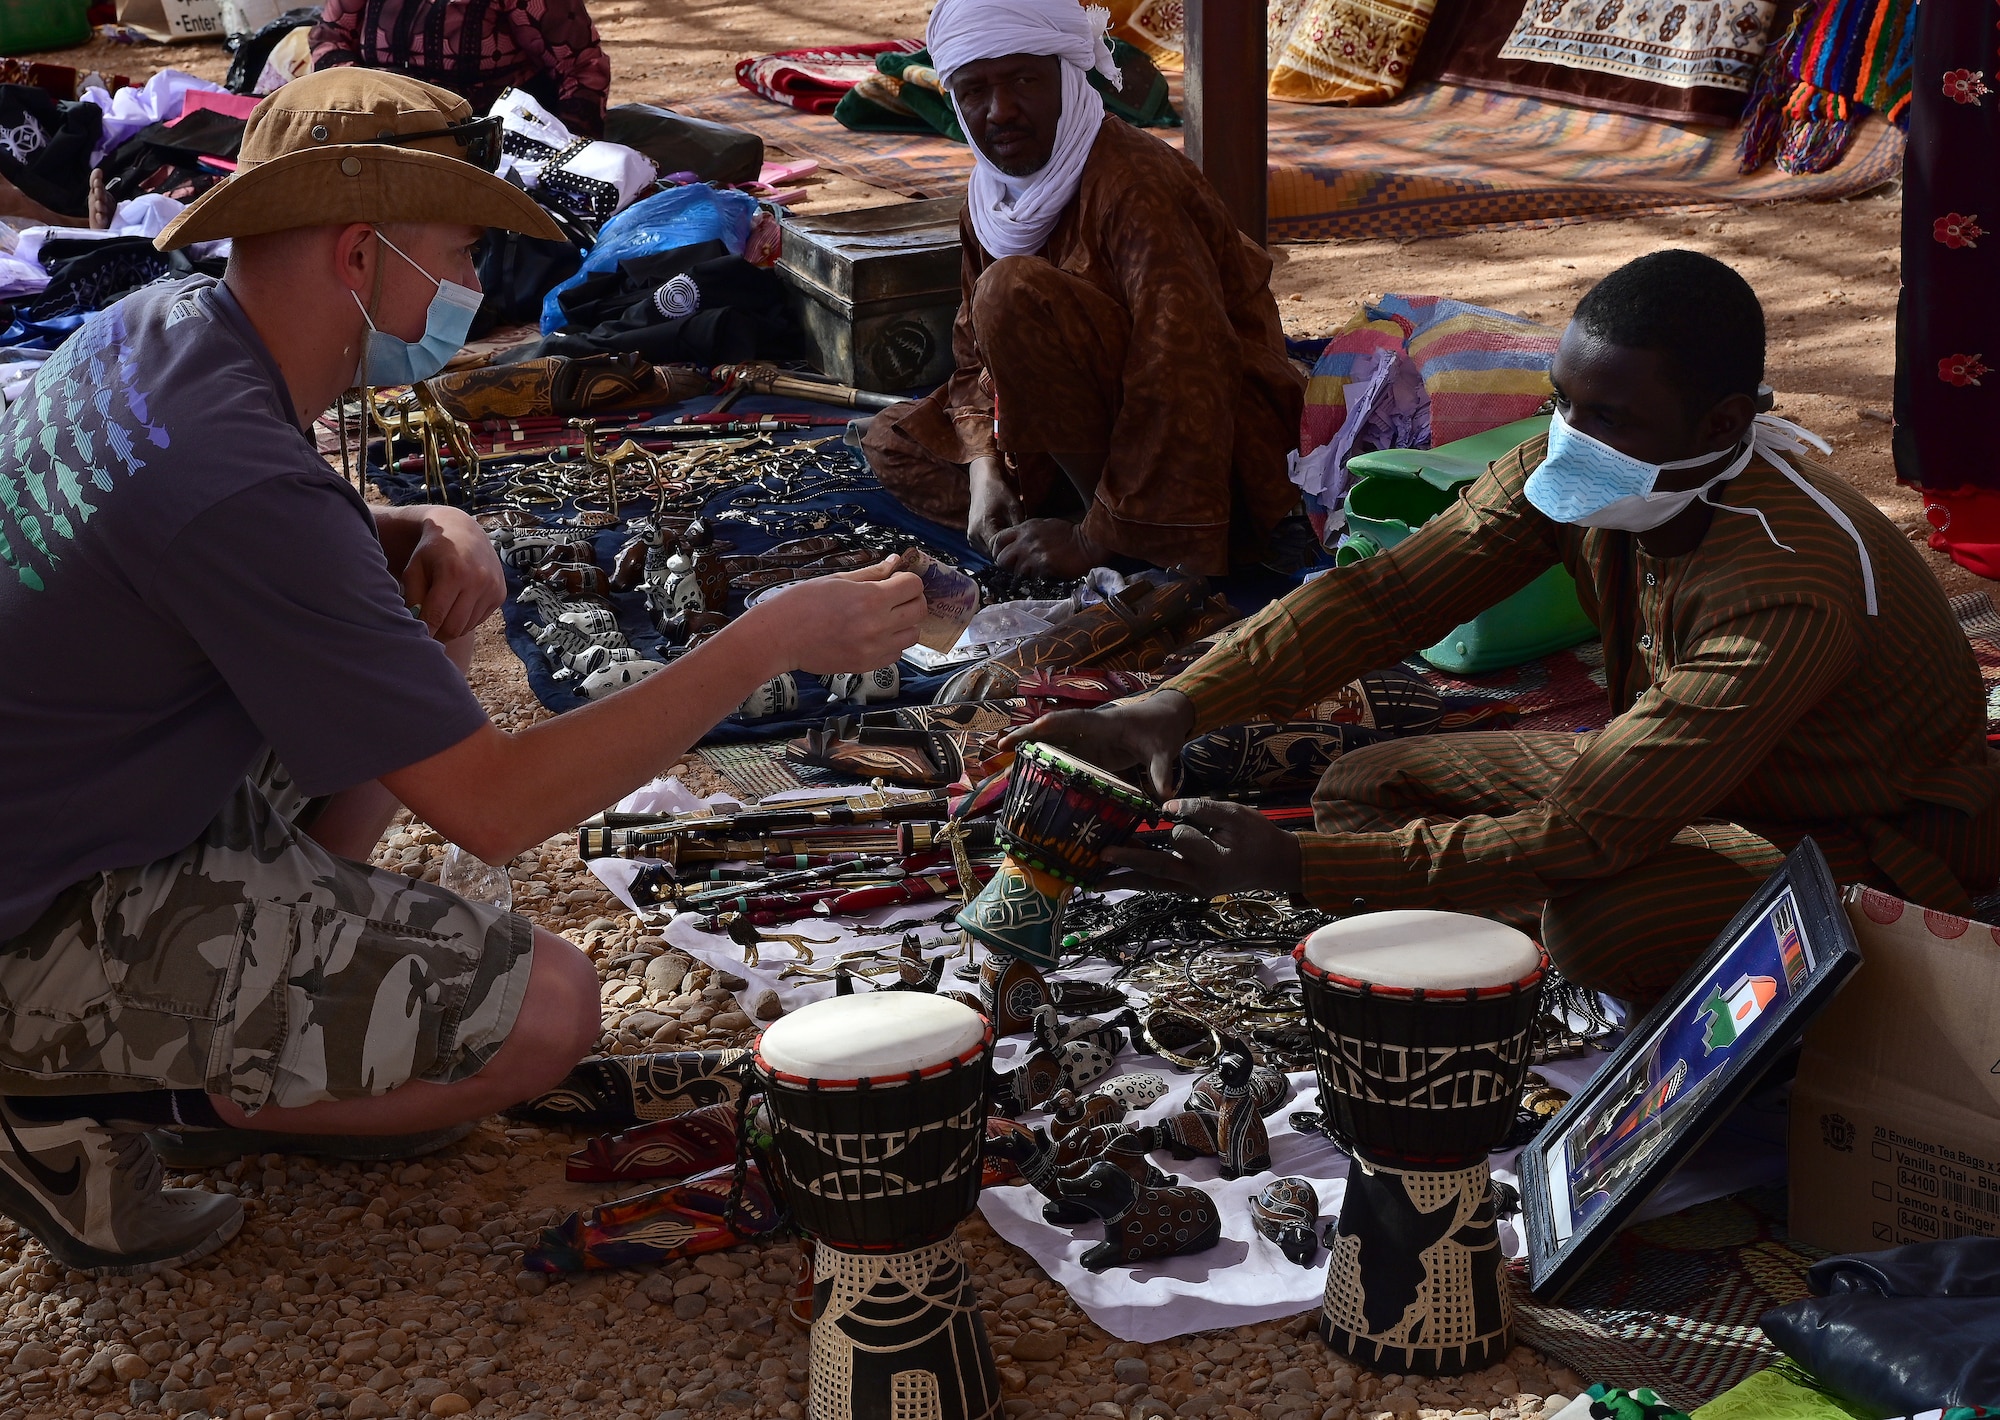 A U.S. Service member purchases a drum during a bazaar at Nigerien Air Base 201, Agadez, Niger Feb. 27, 2022. U.S. service members purchased approximately 10,532,000 West African CFA francs ($18K USD) worth of goods during the bazaar. Events like these enhance U.S., Niger relationships and stimulate local economic development. (U.S. Air Force photo by Tech. Sgt. Stephanie Longoria)